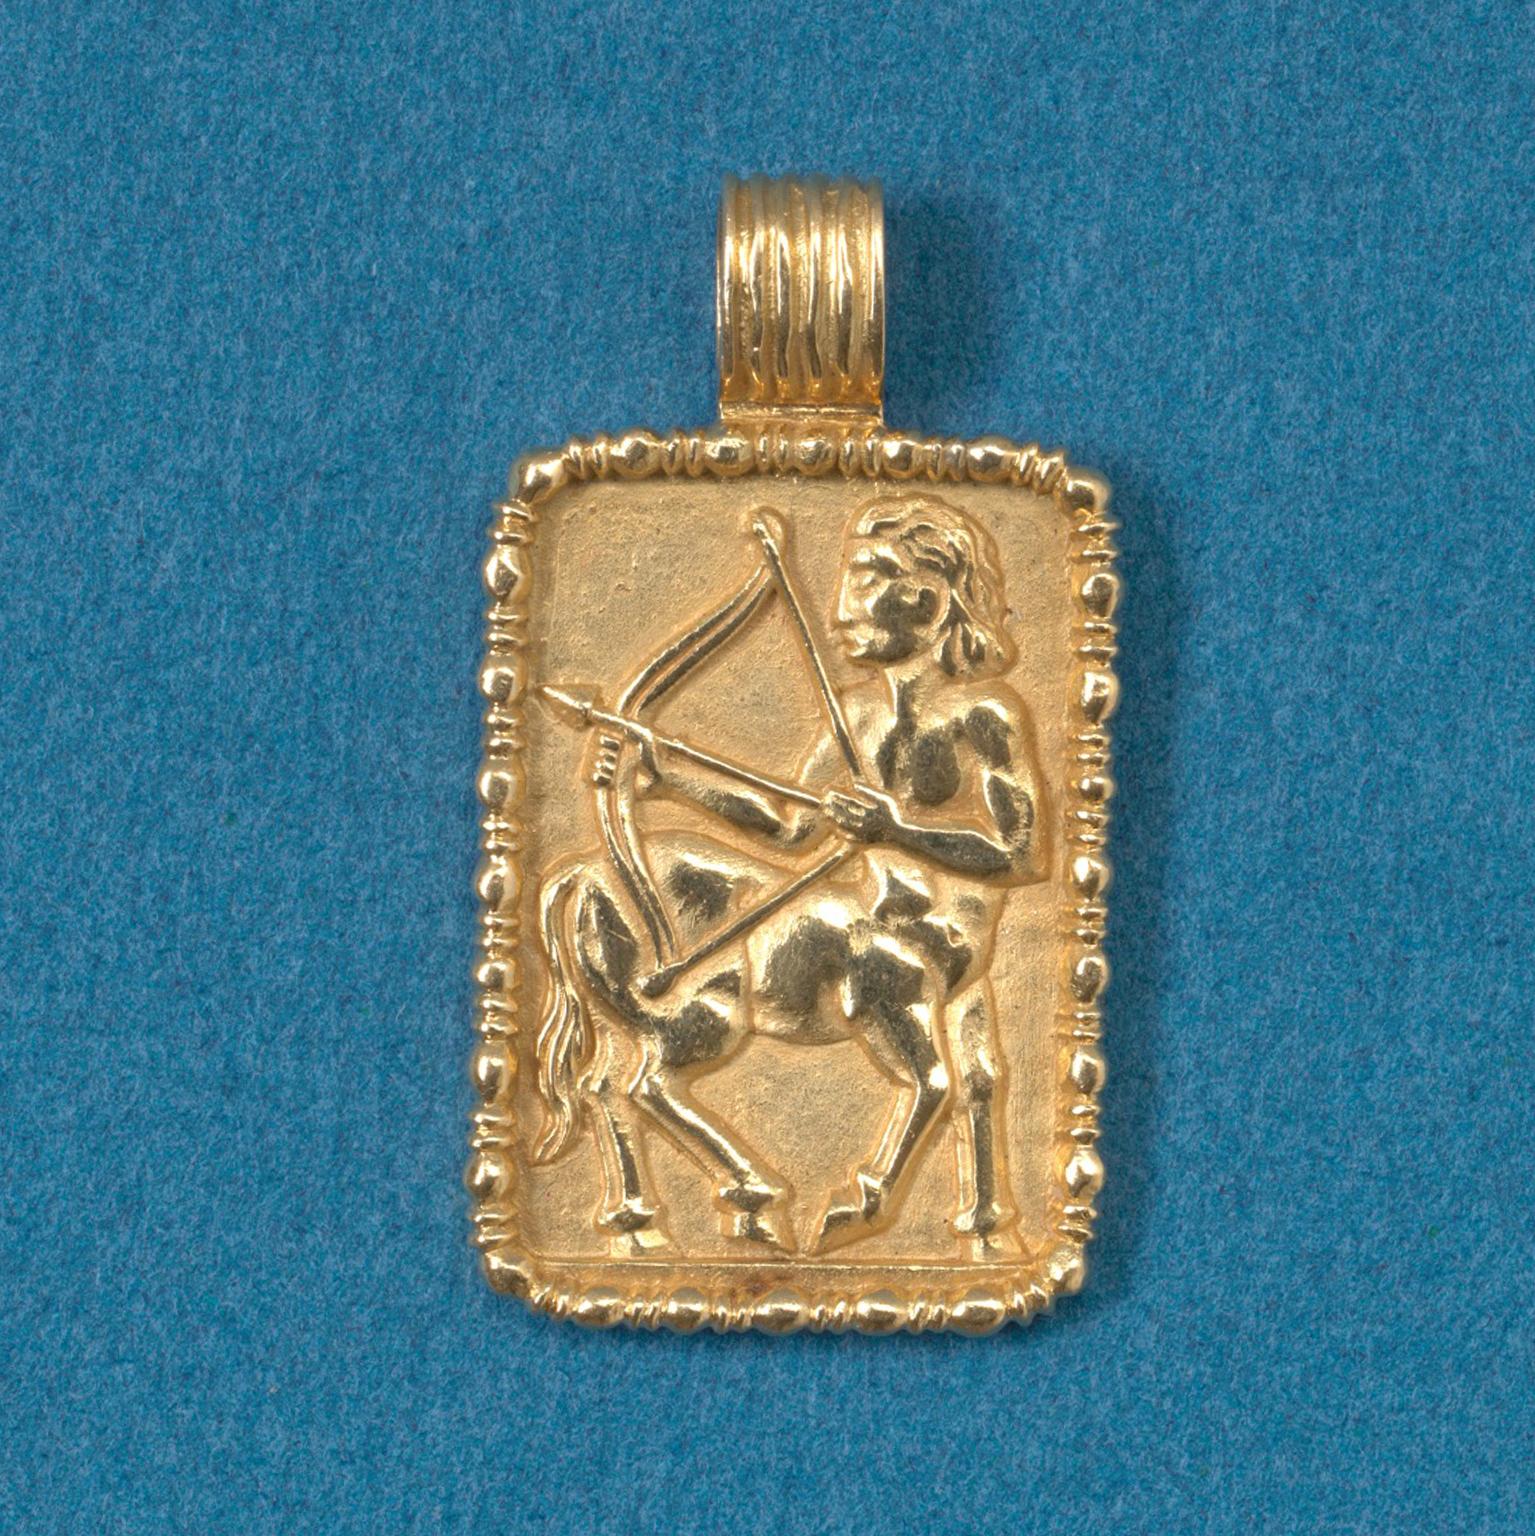 An 18 carat gold zodiac Sagittarius pendant by Fred of Paris, circa 1970.

weight: 15 grams
size without bail: 3.1 x 2.2 cm